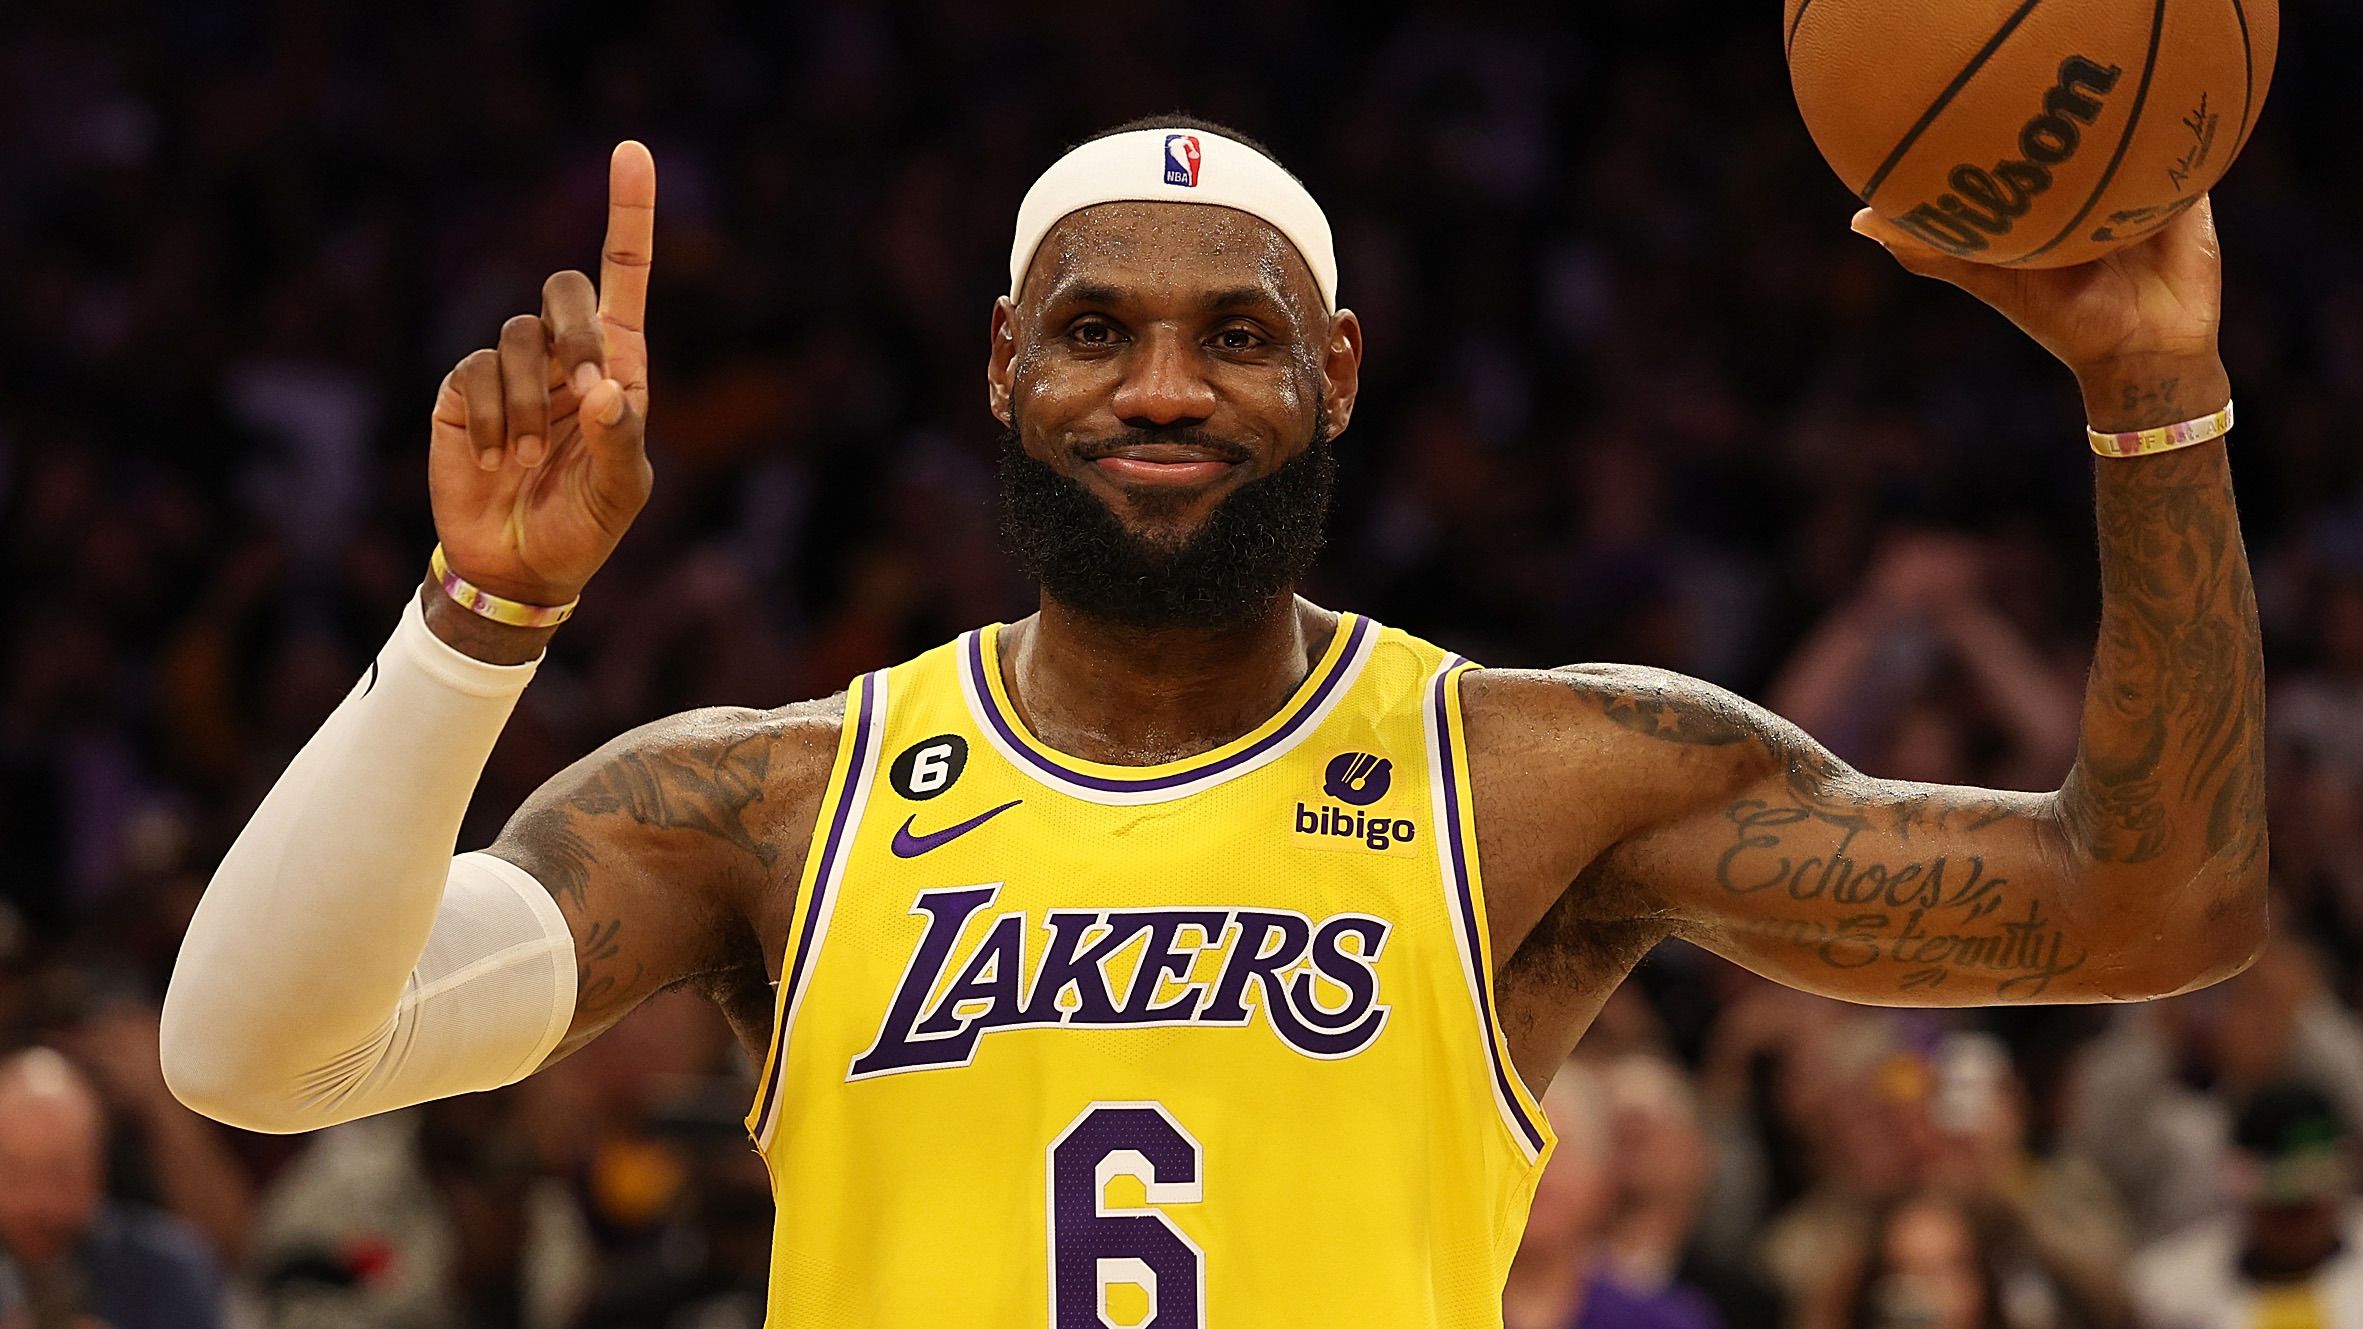 NBA's hottest ticket? Lakers demand surges after LeBron James